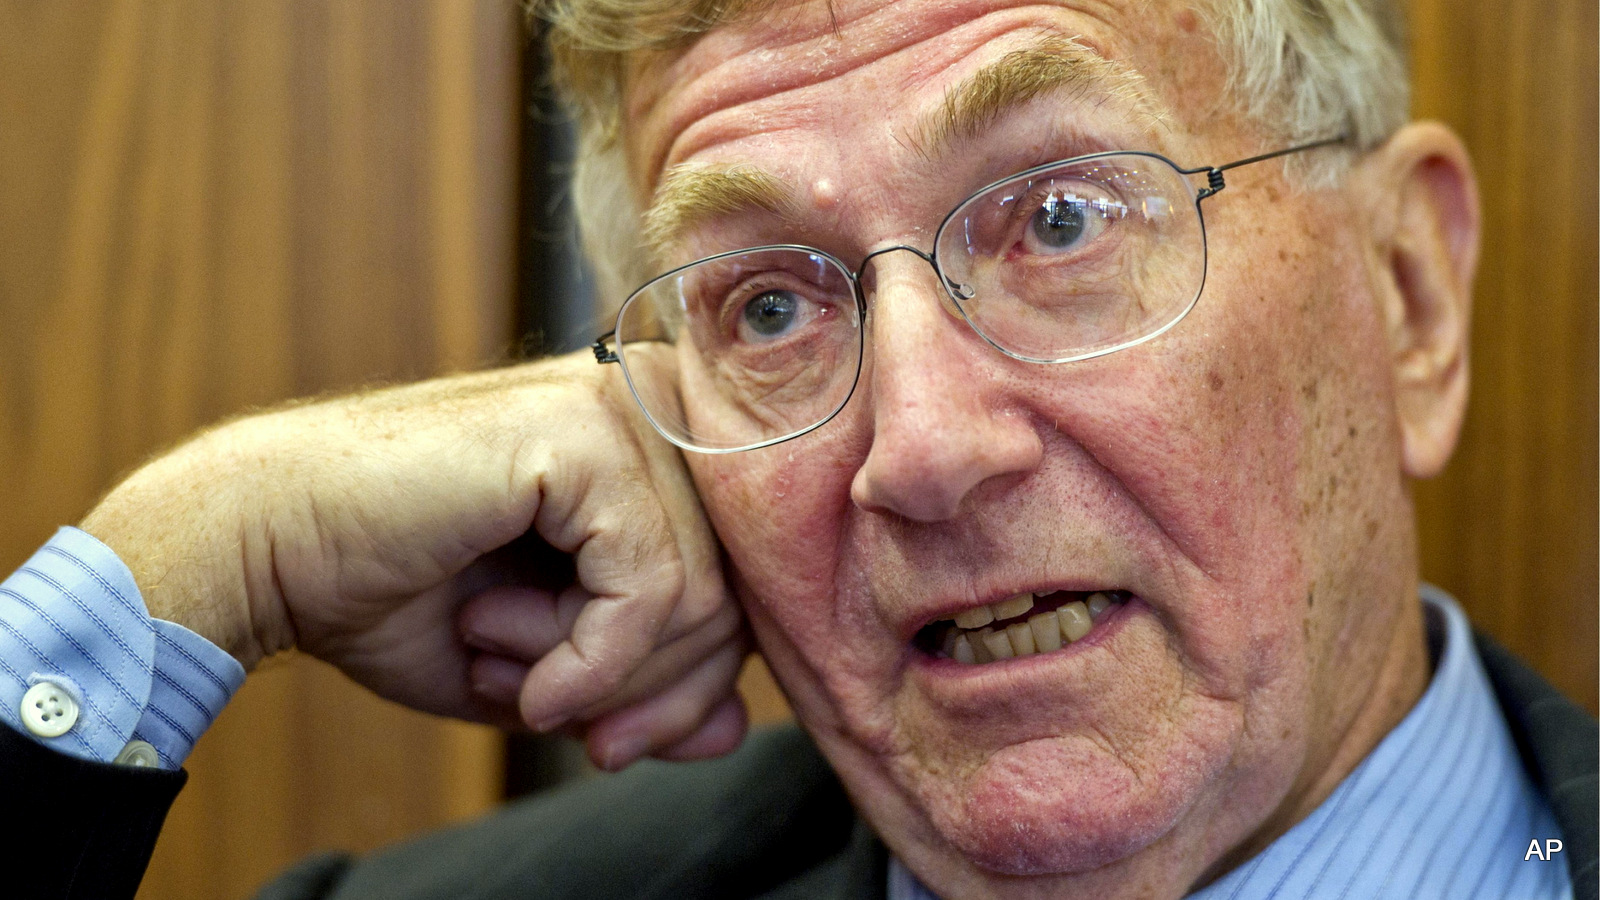 He exposed the My Lai massacre, revealed Nixon's secret bombing of Cambodia and has hounded Bush and Cheney over the abuse of prisoners in Abu Ghraib, and as far as back as 2007 Seymour Hersh has been challenging the official narrative on Syria.